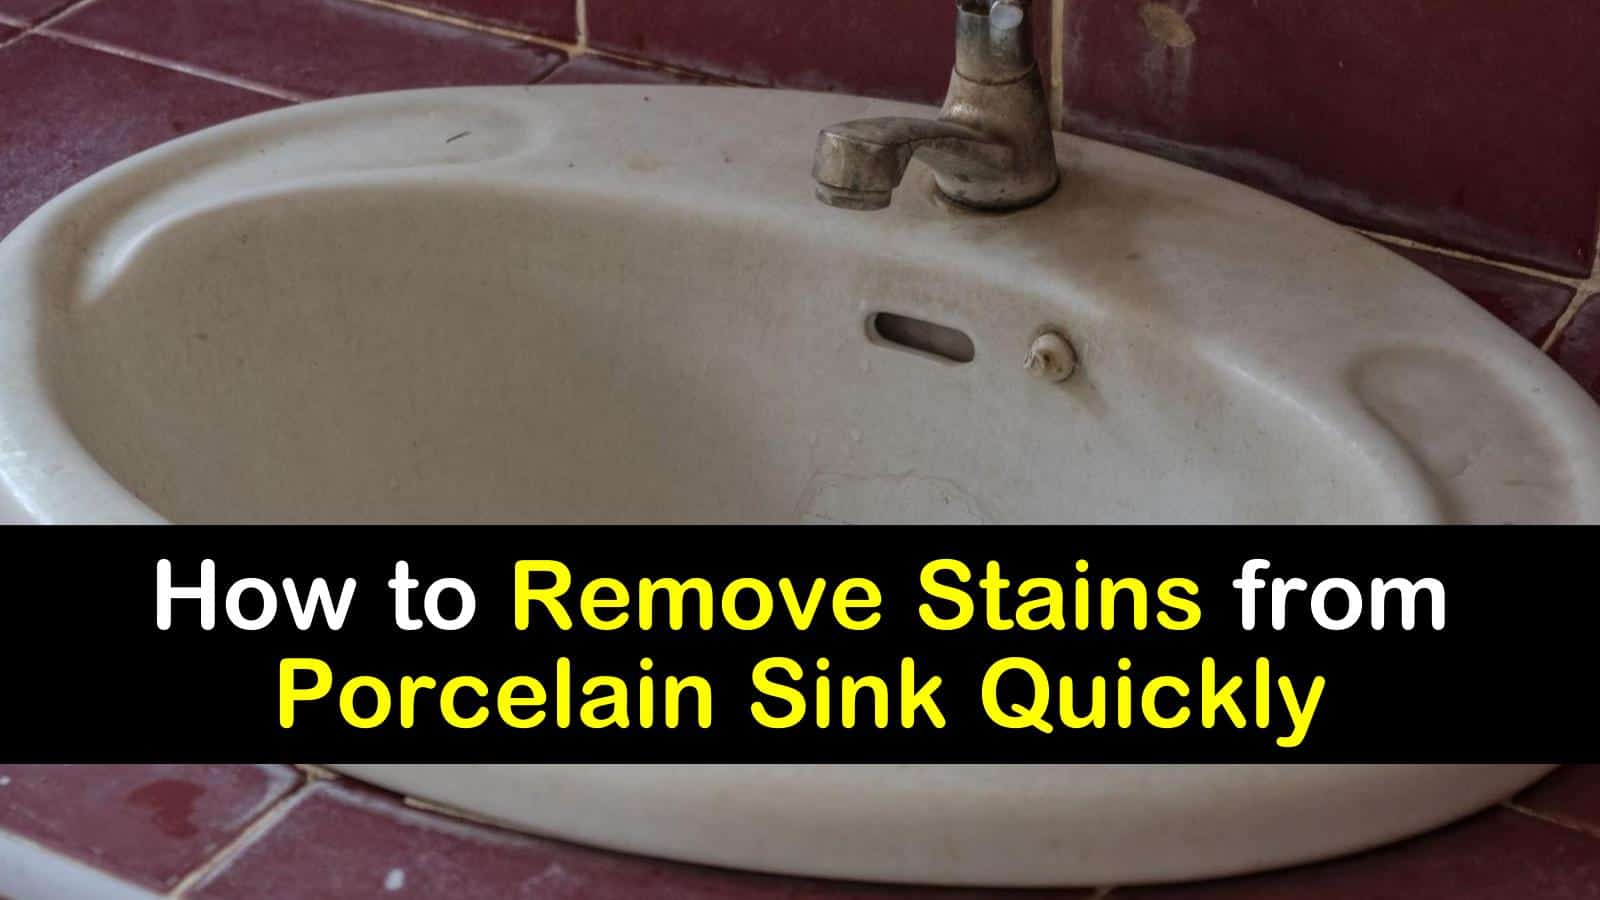 how to remove stains from porcelain sink titleimg1